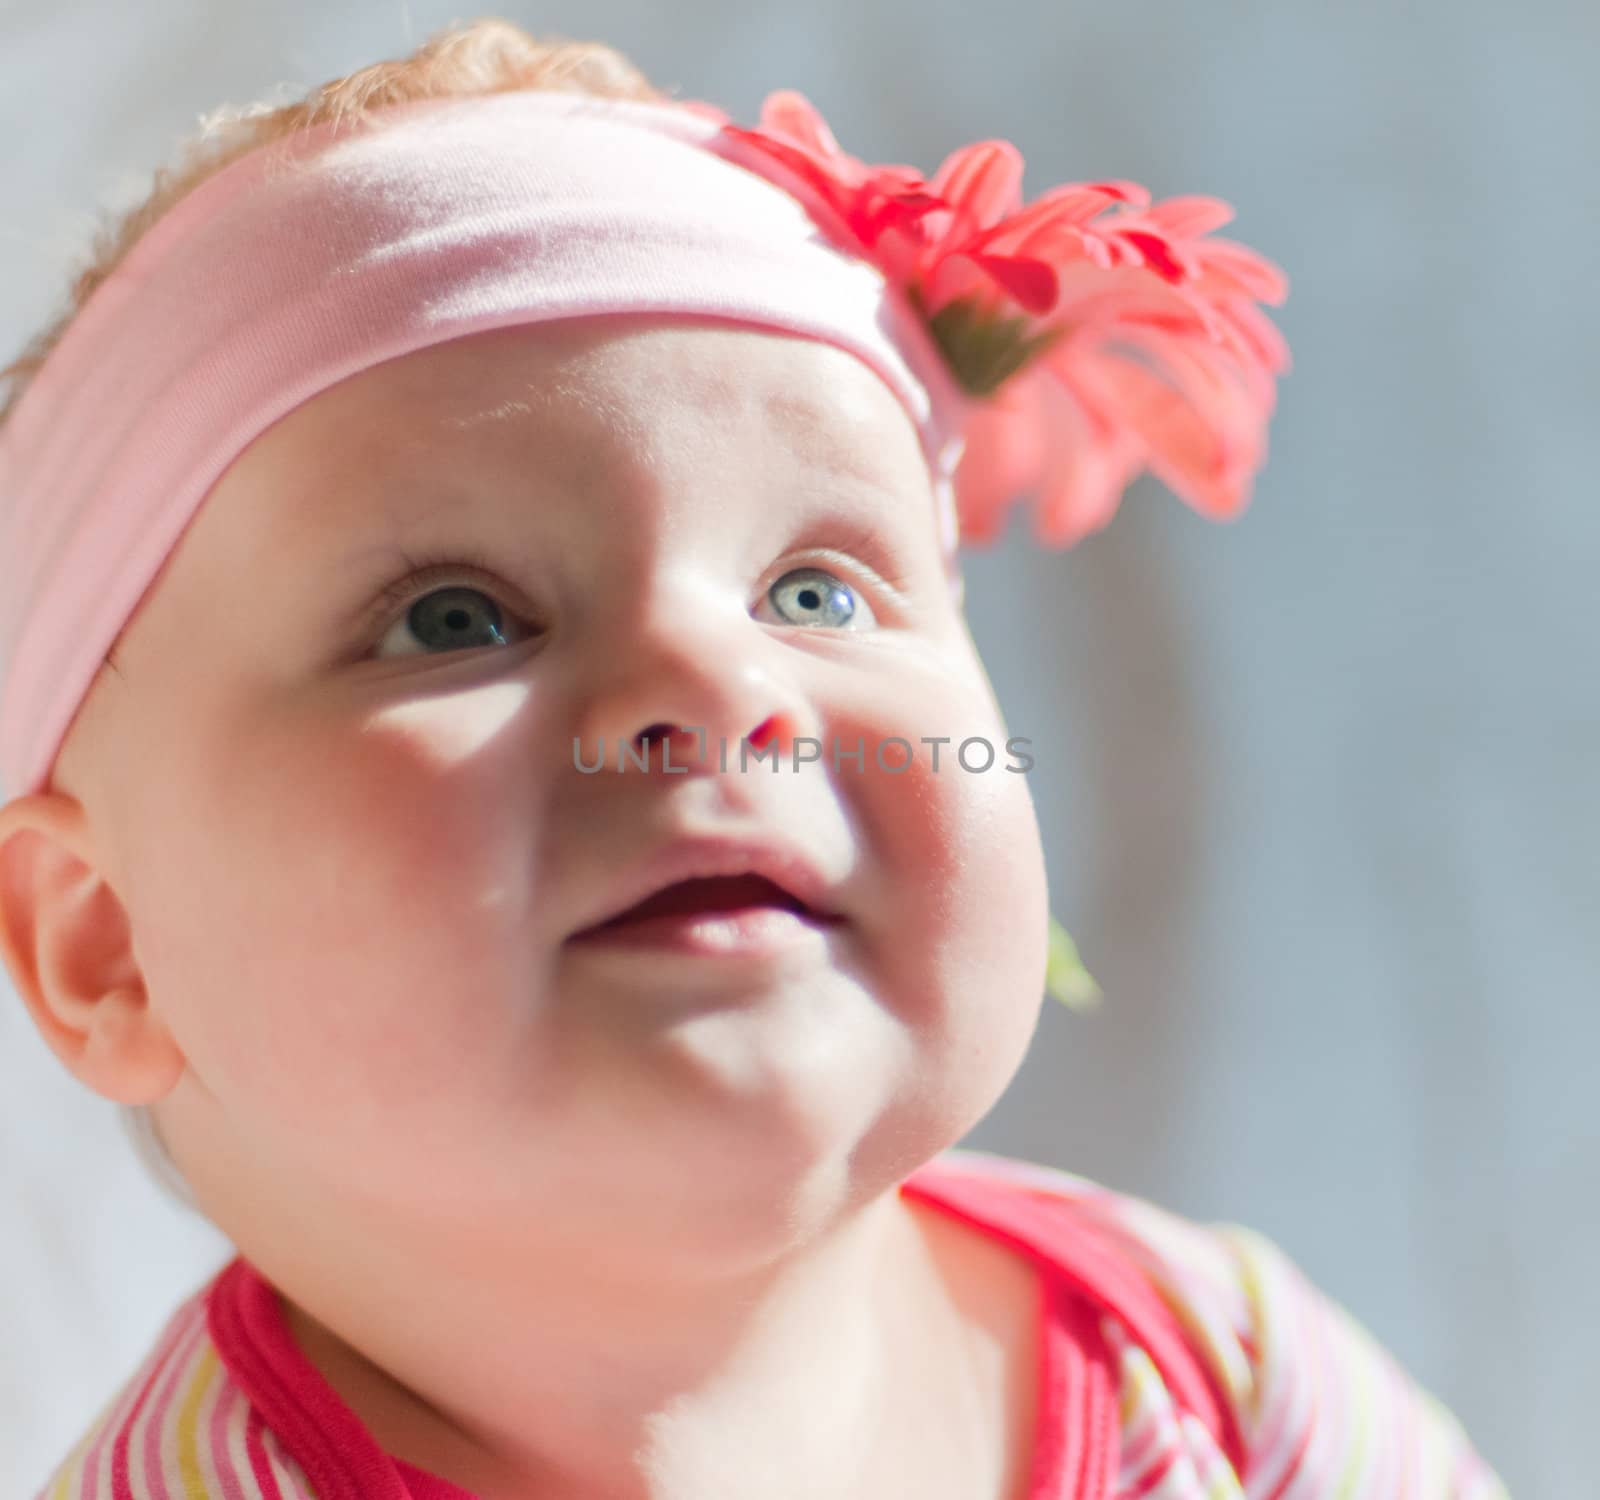 Baby in the headband with gerbera flower